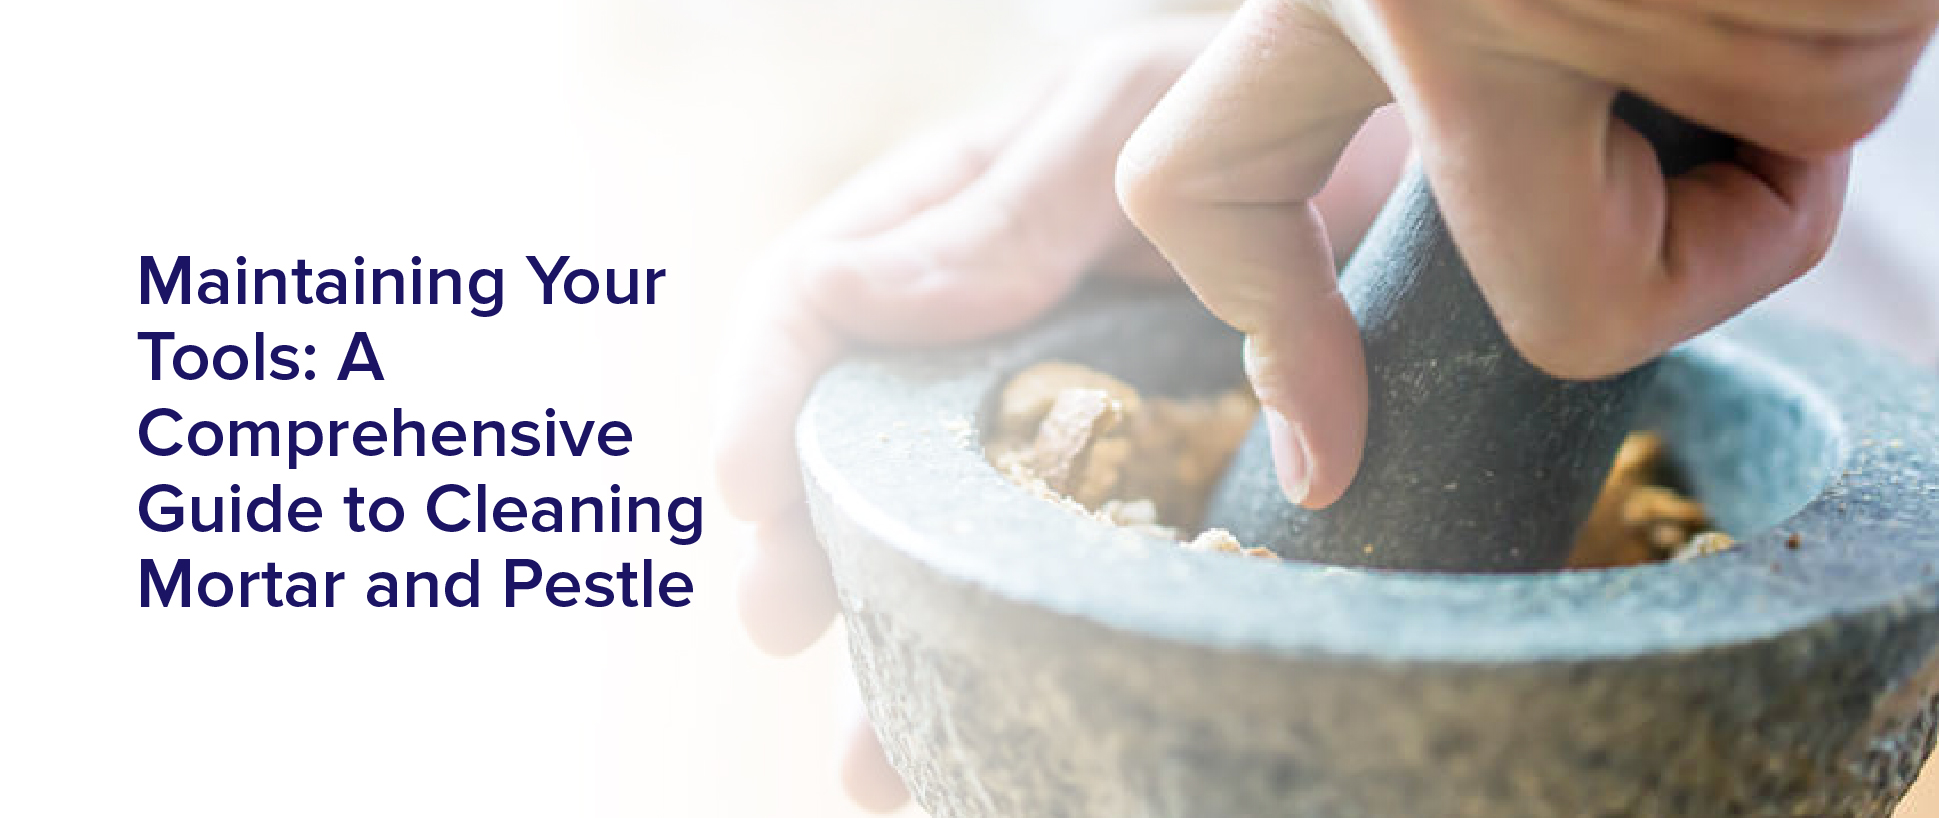 Maintaining Your Tools: A Comprehensive Guide To Cleaning Mortar And Pestle